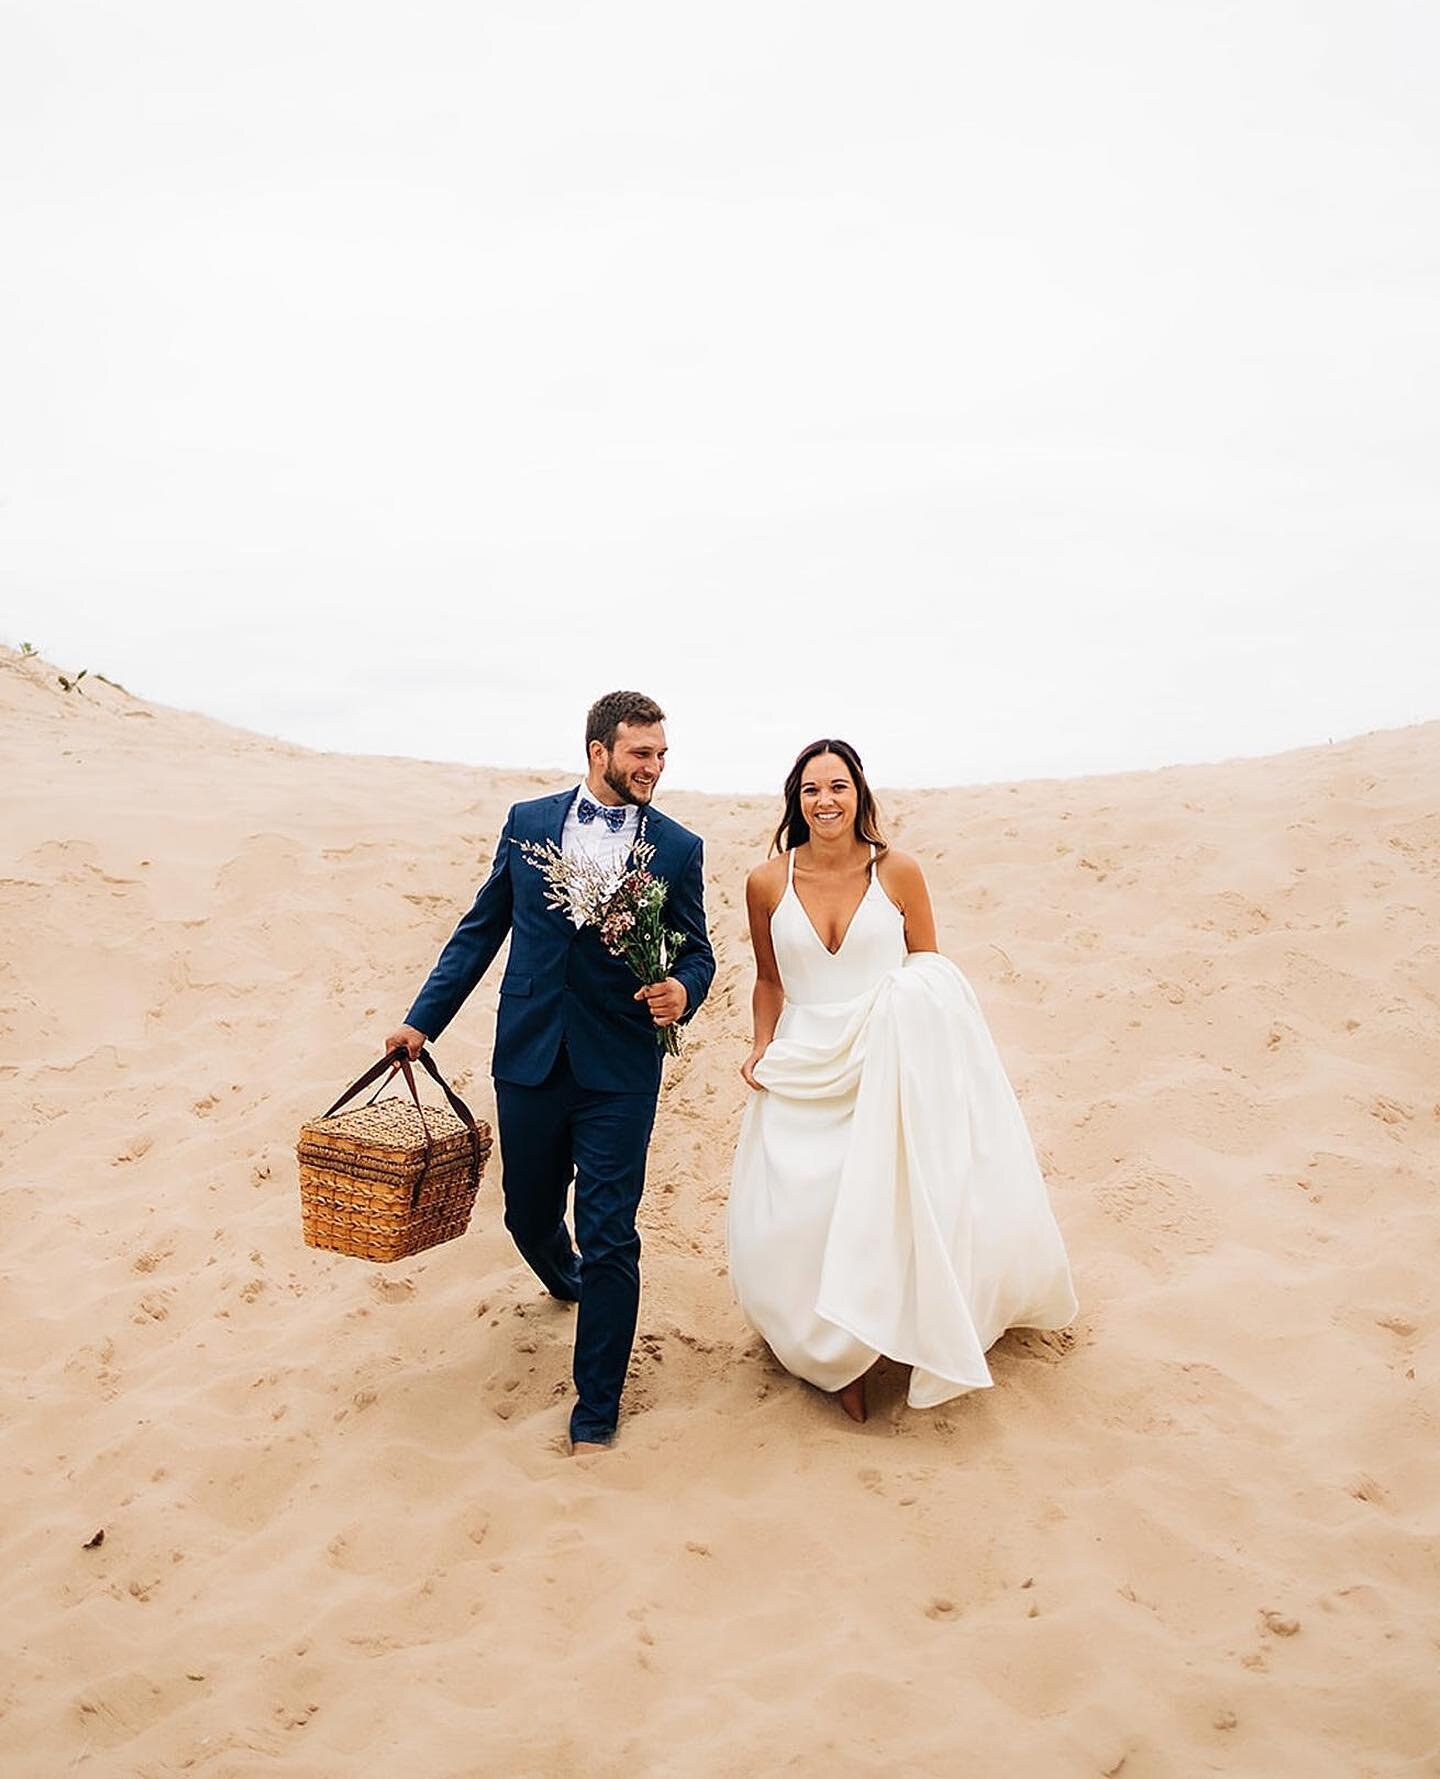 Wedding re-do!⁠
⁠
Kara and Cole&rsquo;s real wedding wasn&rsquo;t what they imagined. When I heard the story it broke my heart, so I took them to the beach and we had an adventure. 

It&rsquo;s never to late 💖